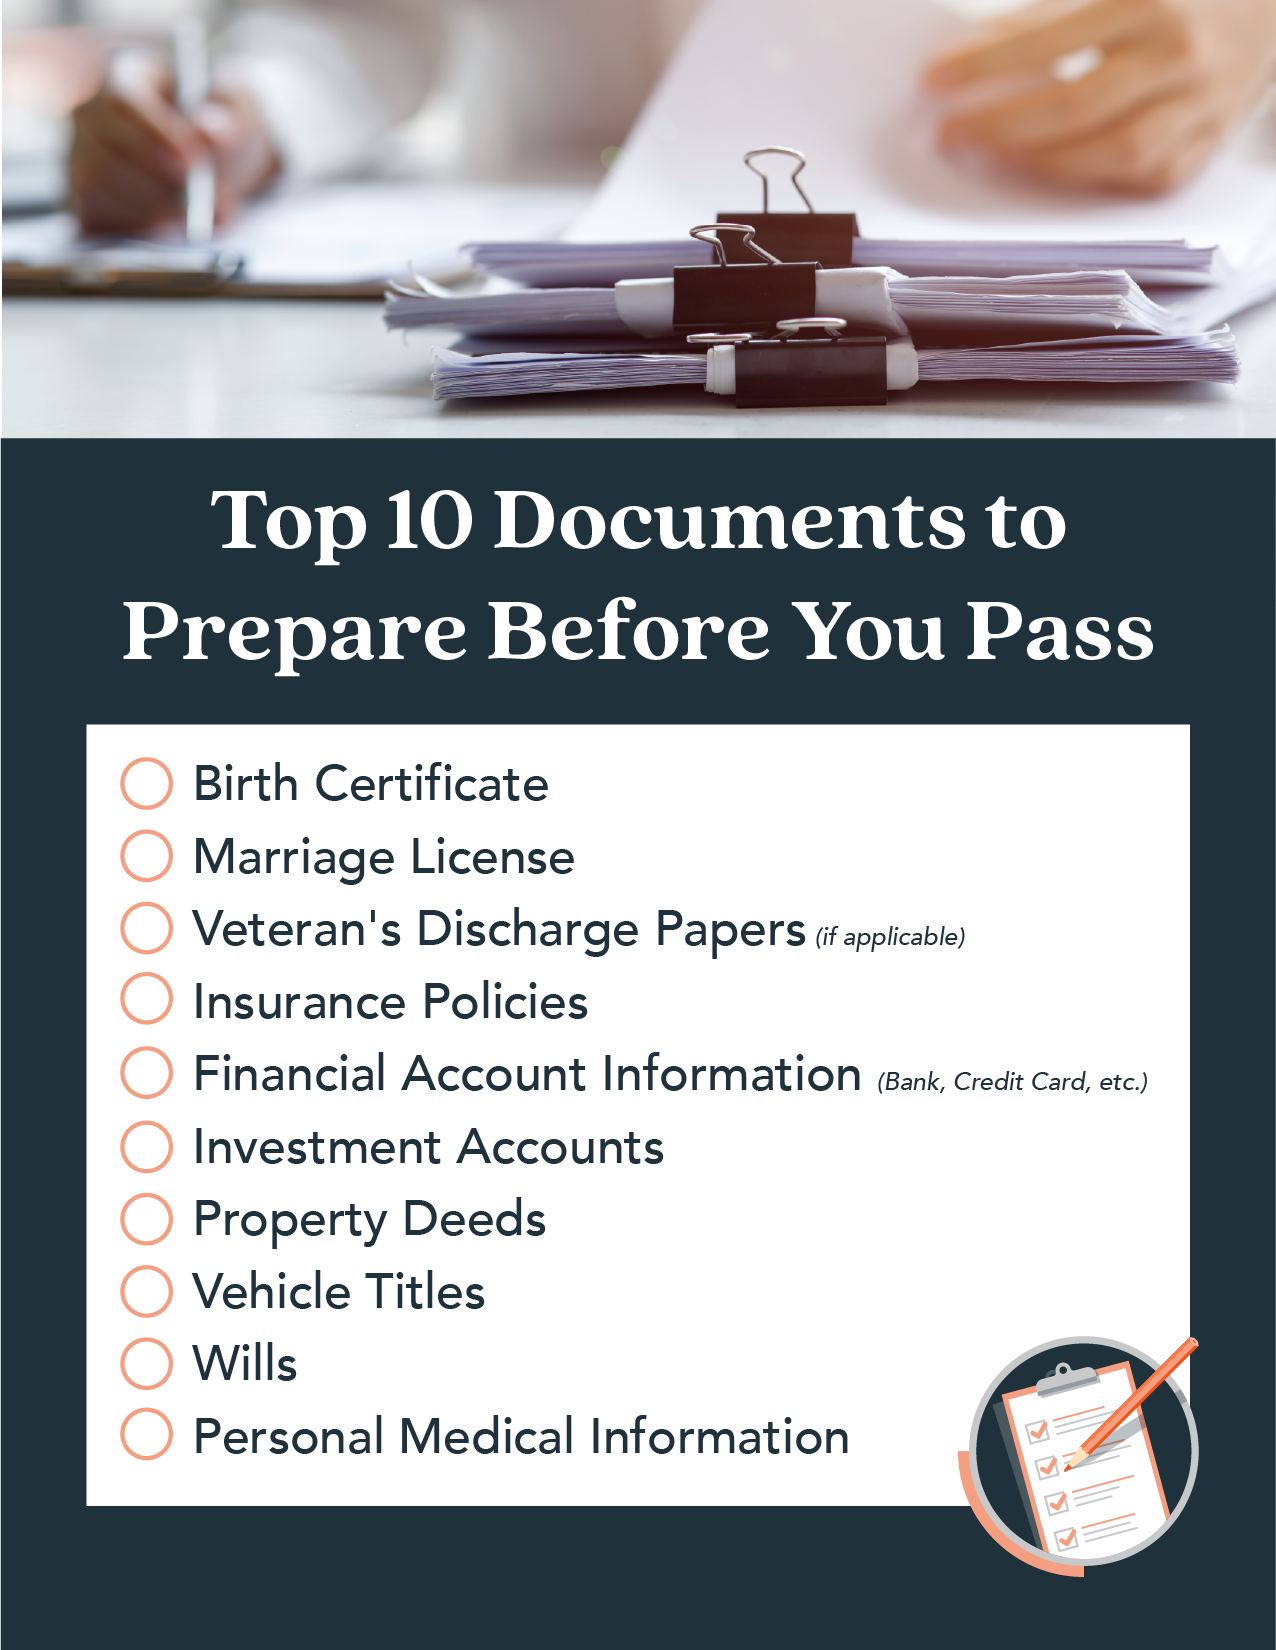 List of 10 Documents to Prepare Before You Pass